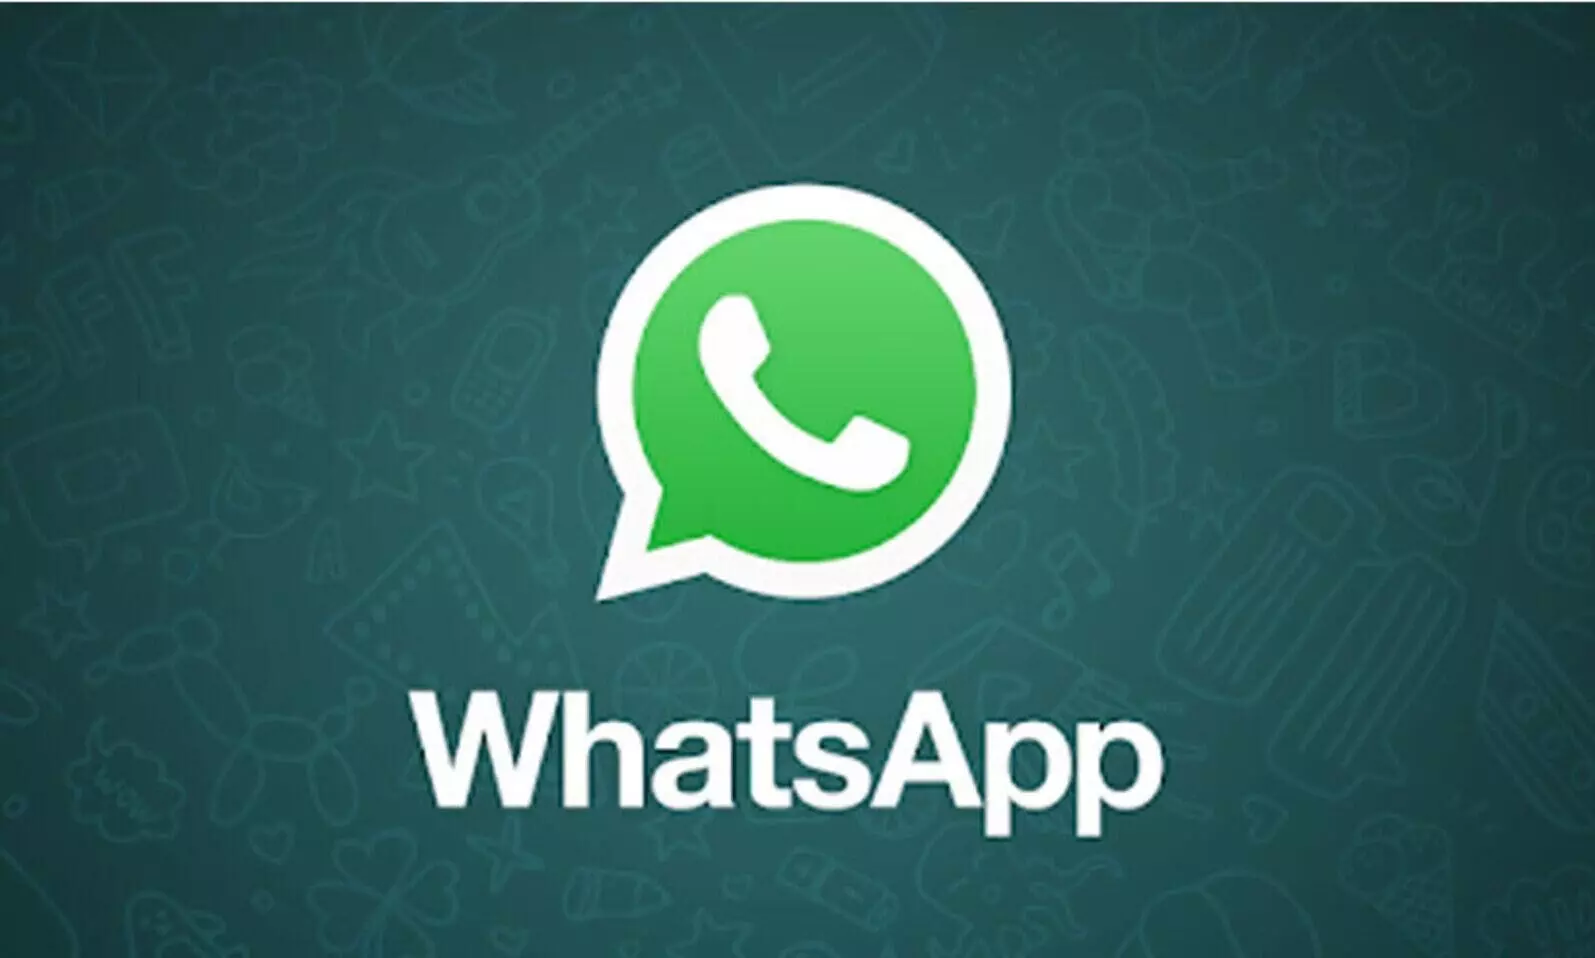 WhatsApp introduces automatic delete messages tool